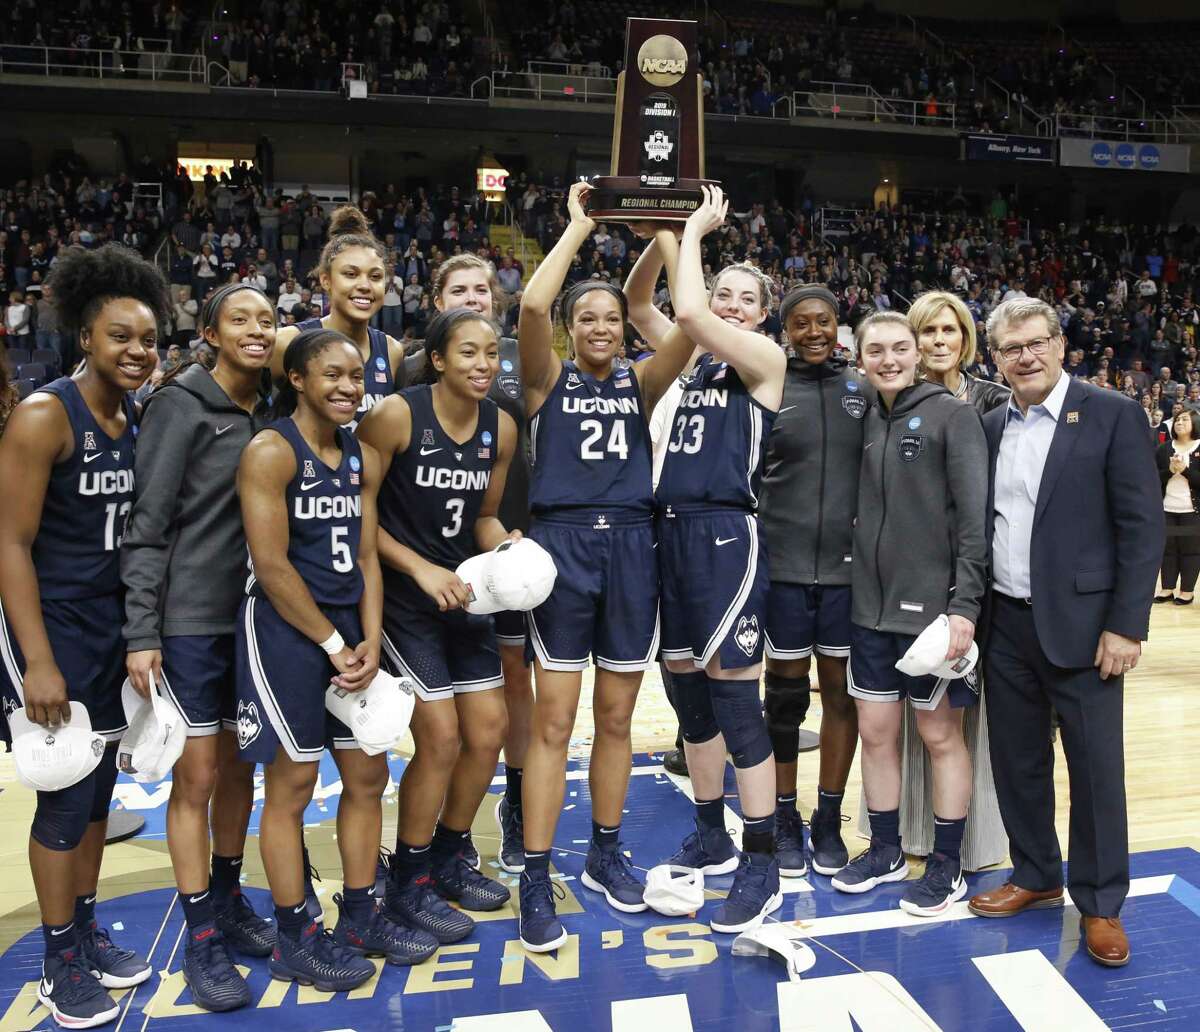 UConn players and coach Geno Auriemma, far right, celebrate with their trophy after winning the regional championship game in the NCAA women’s basketball tournament on Sunday.